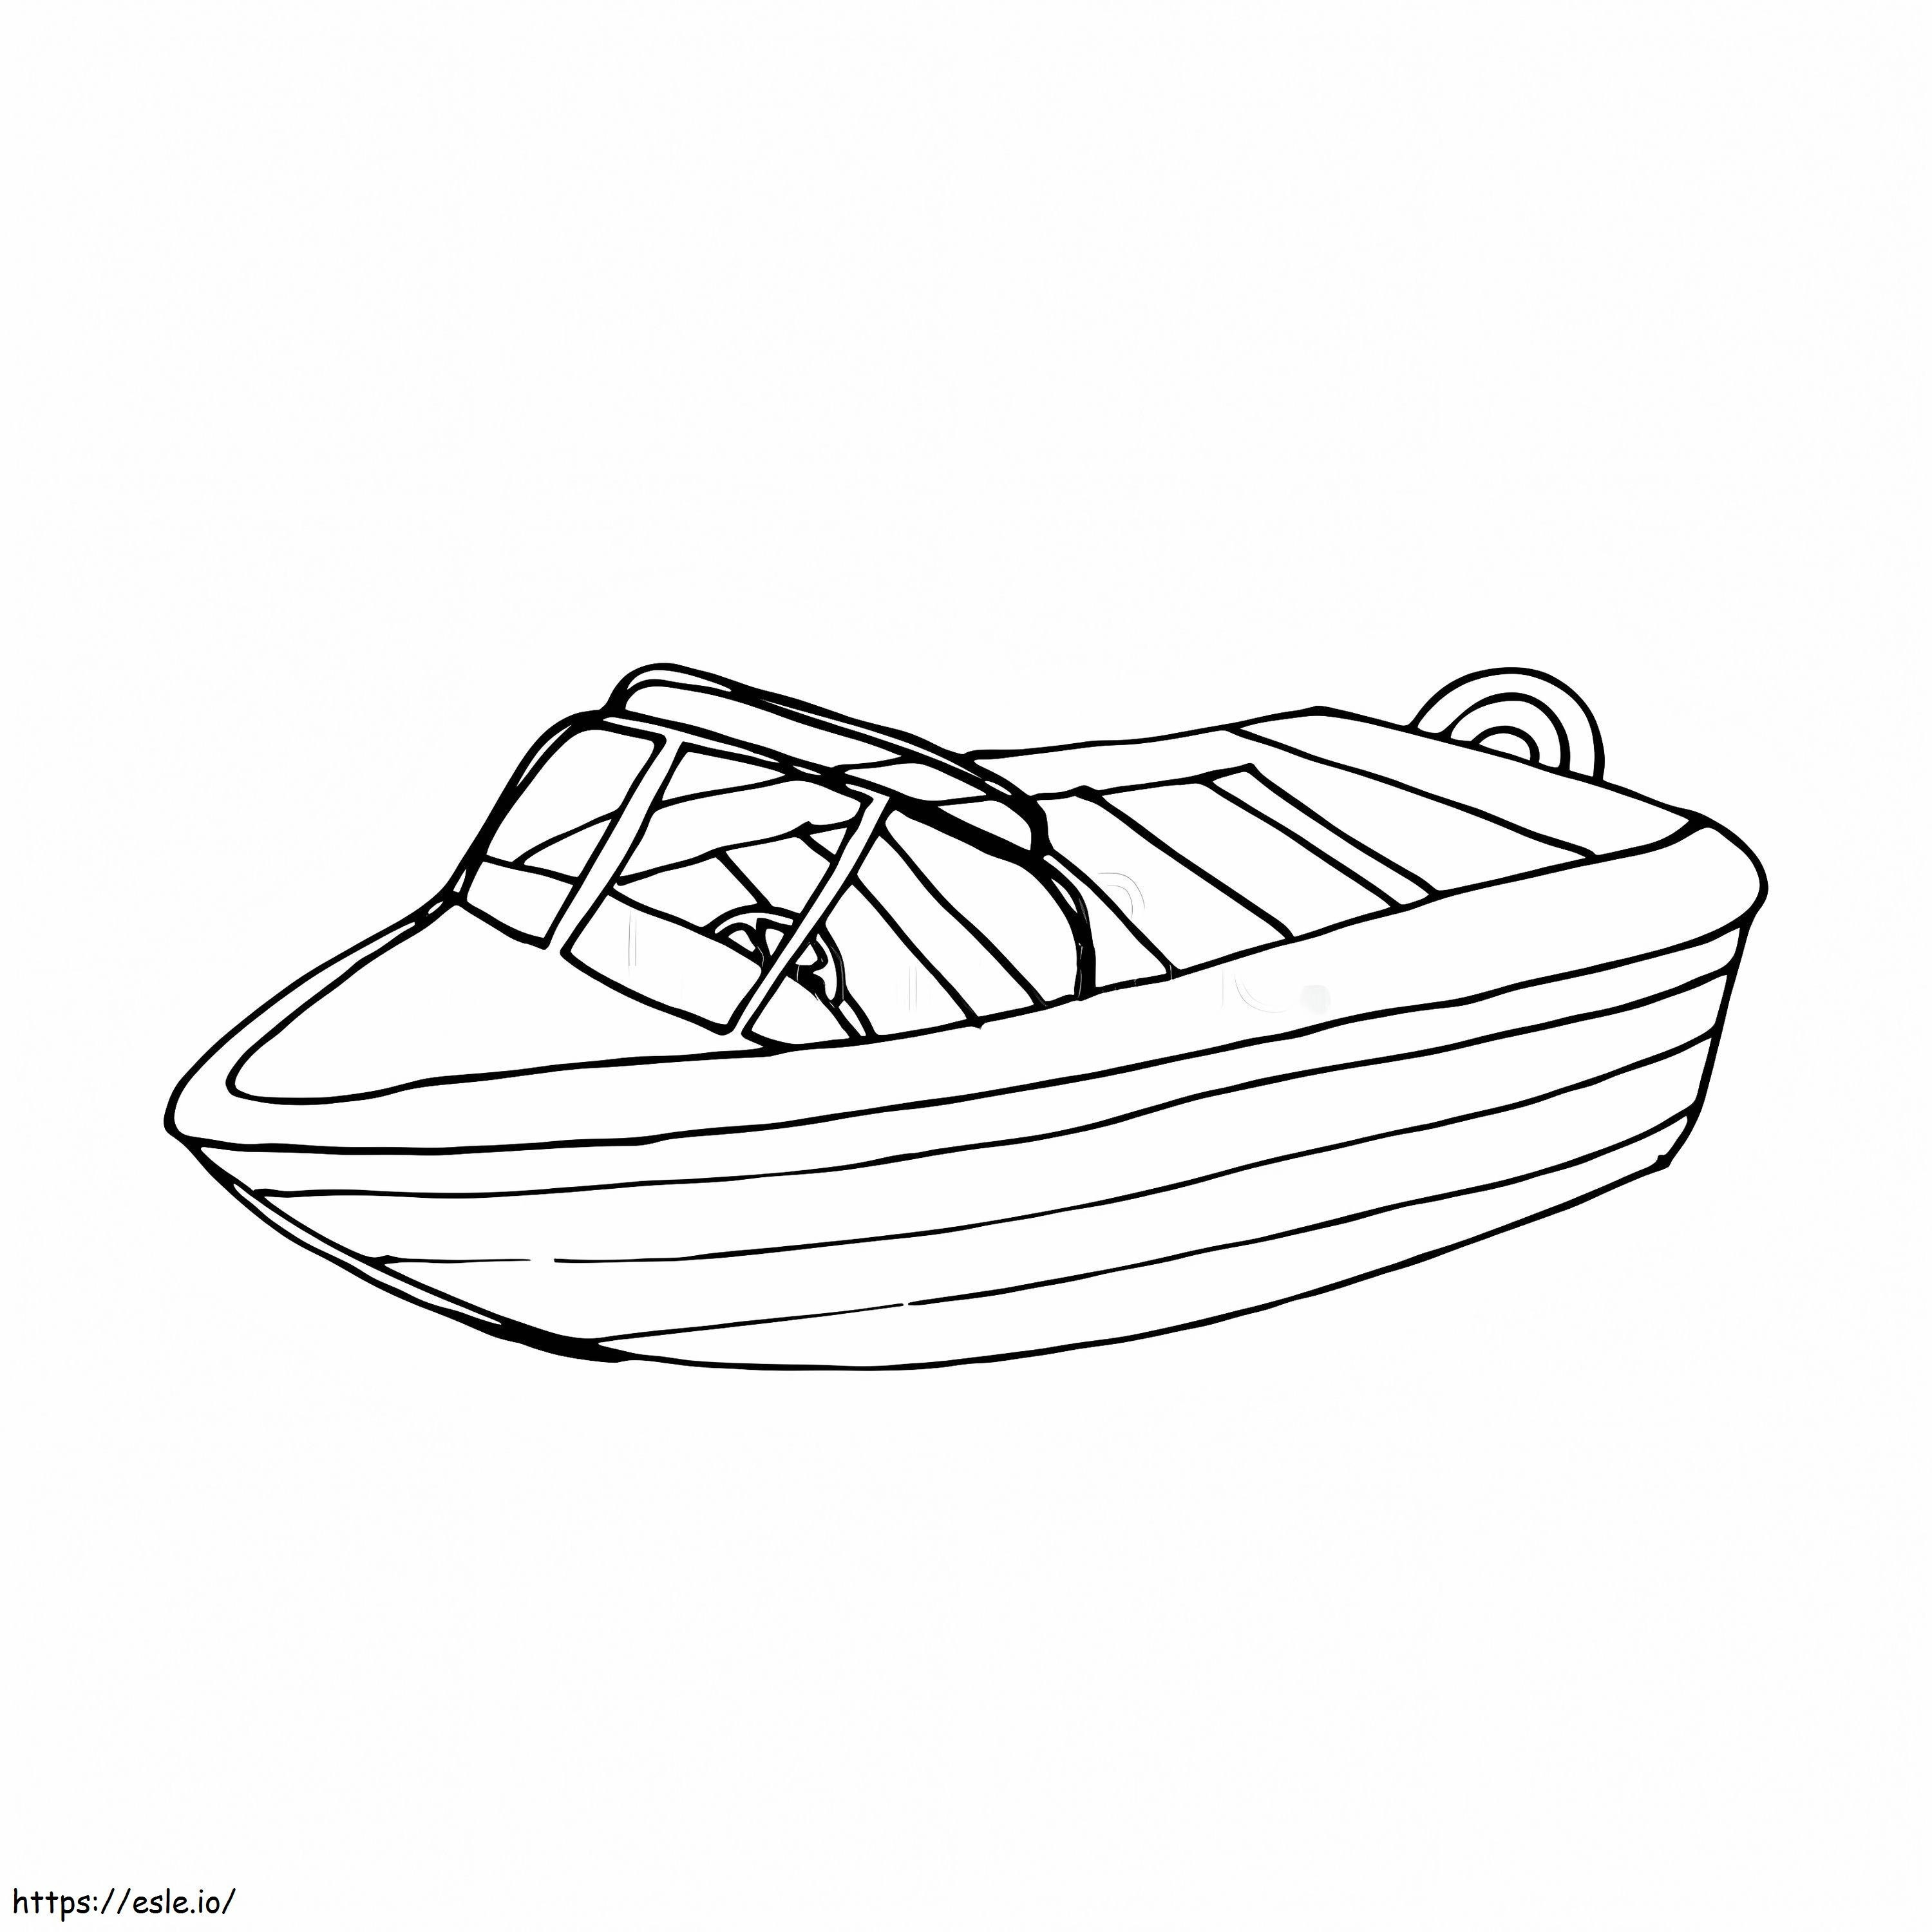 Basic Catboat coloring page